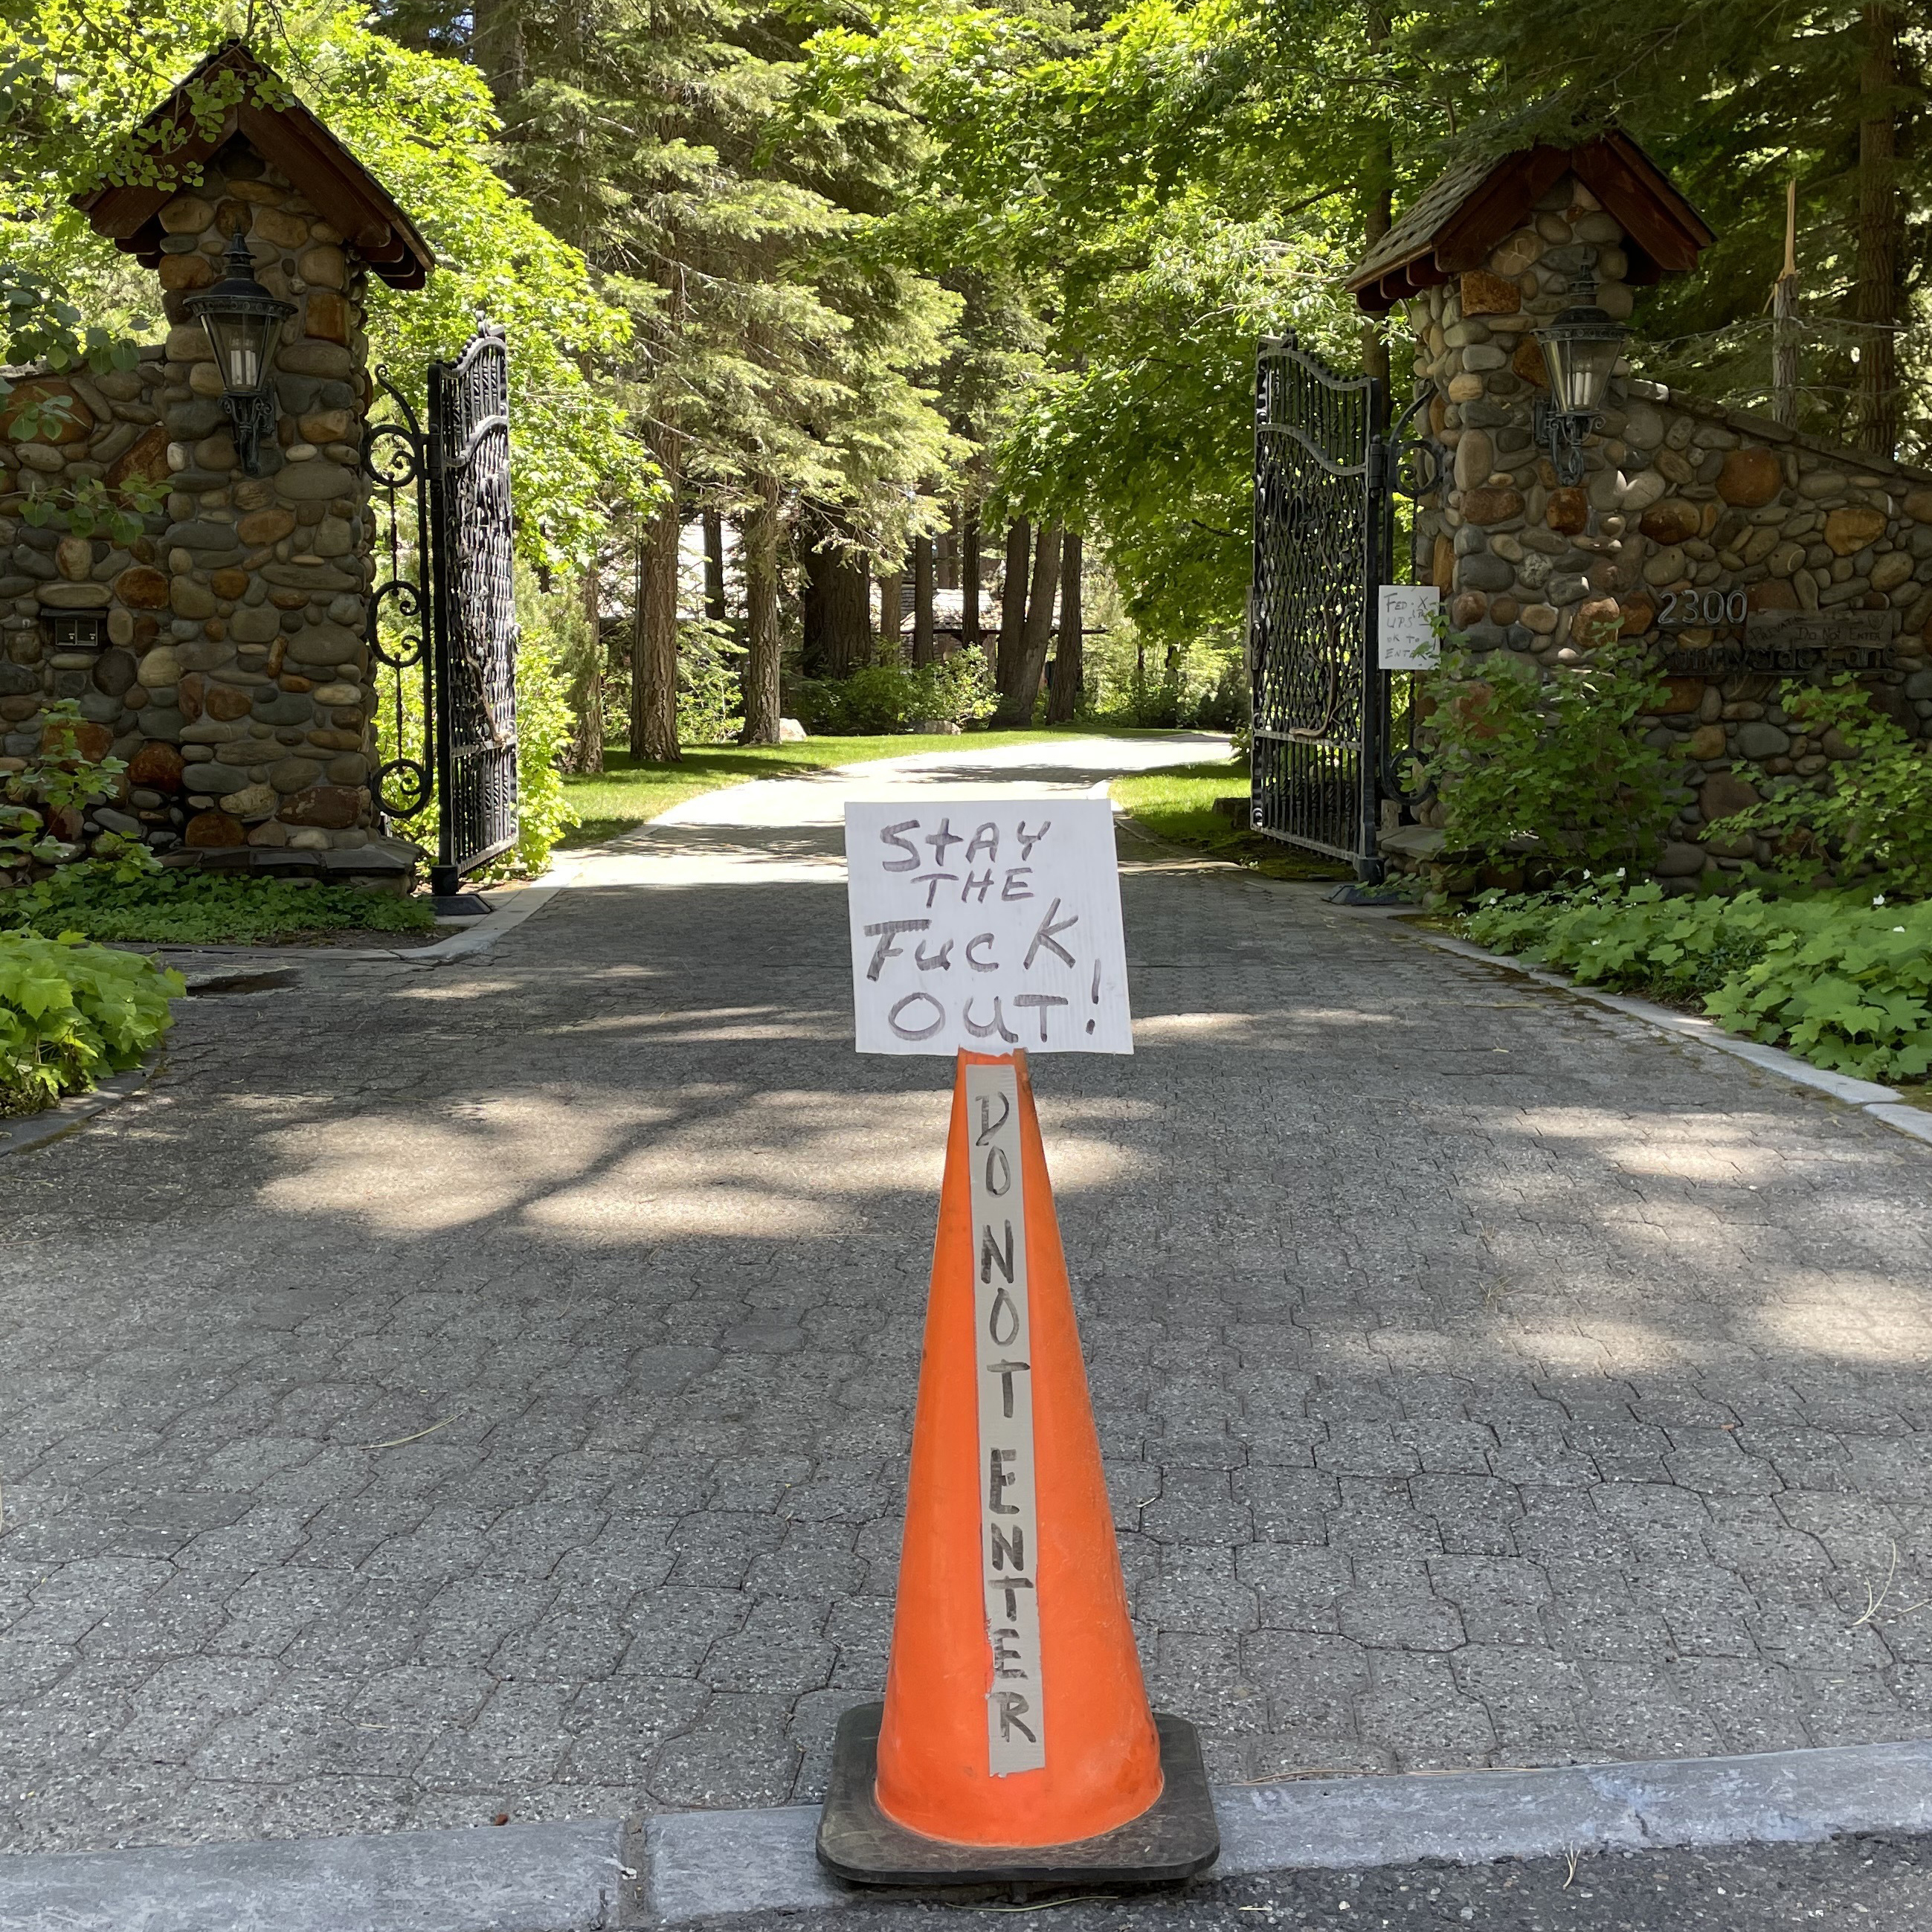 The image shows a gated driveway with a stone entrance, and a traffic cone bearing a sign that reads, "STAY THE FUCK OUT!" with "DO NOT ENTER" written vertically on the cone.